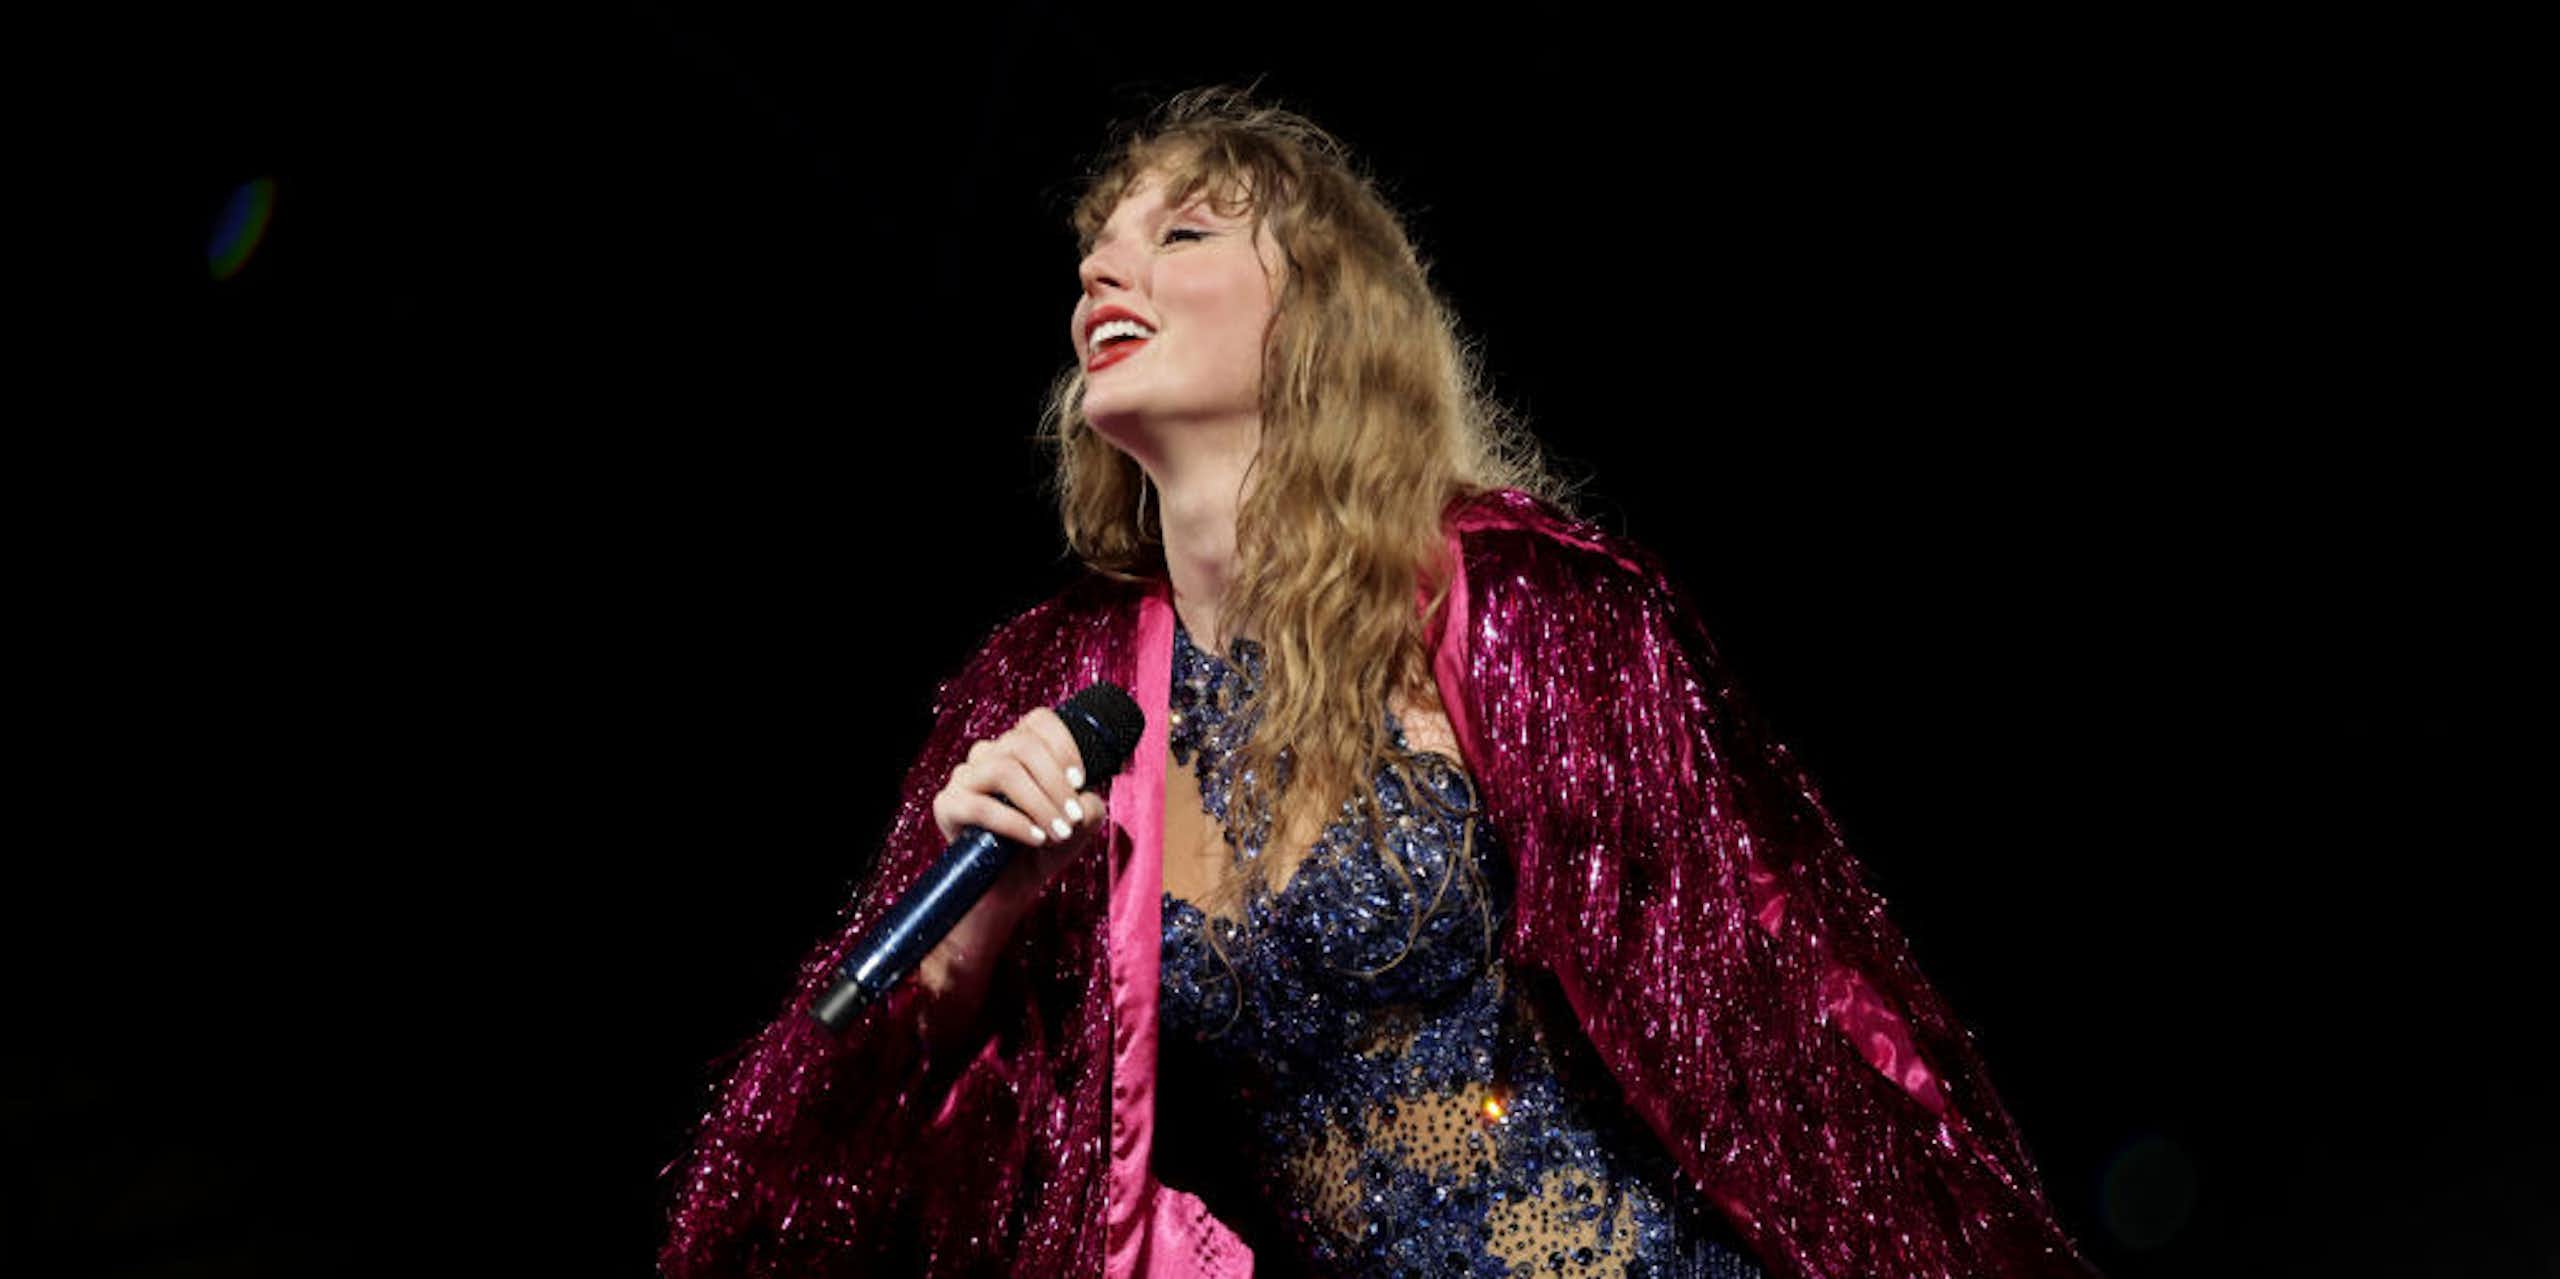 A blond woman smiles as she sings in a sparkly purple robe and blue bodysuit.